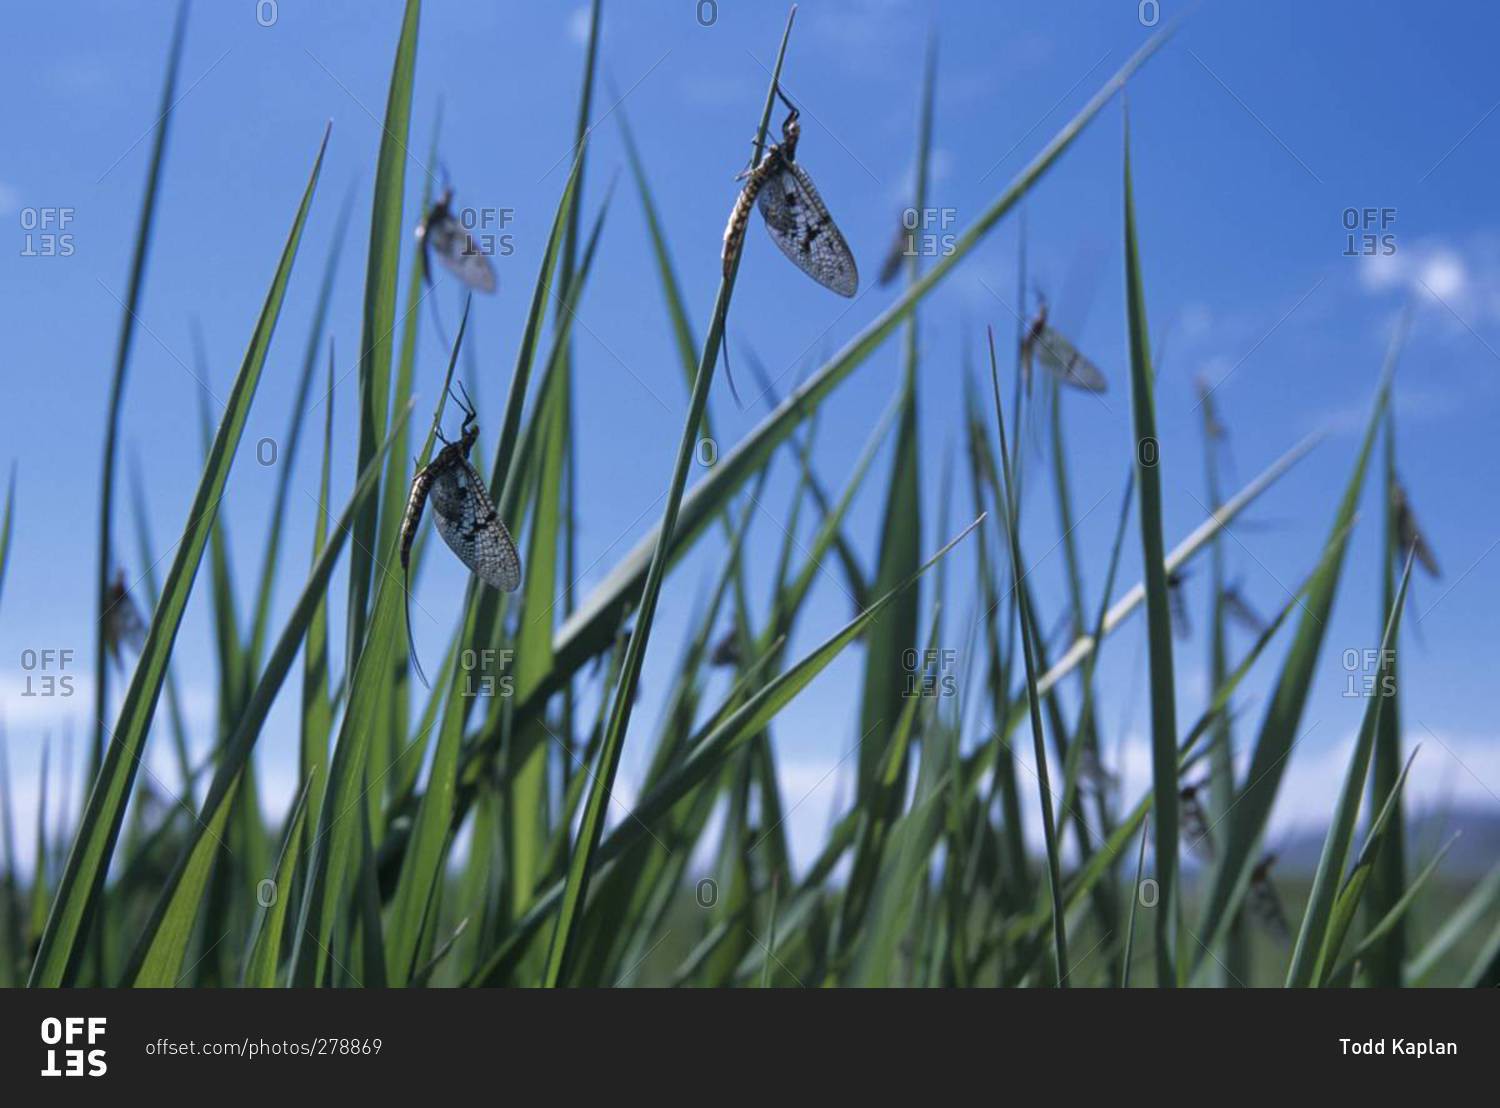 Brown Drake insects perched on blades of tall grass